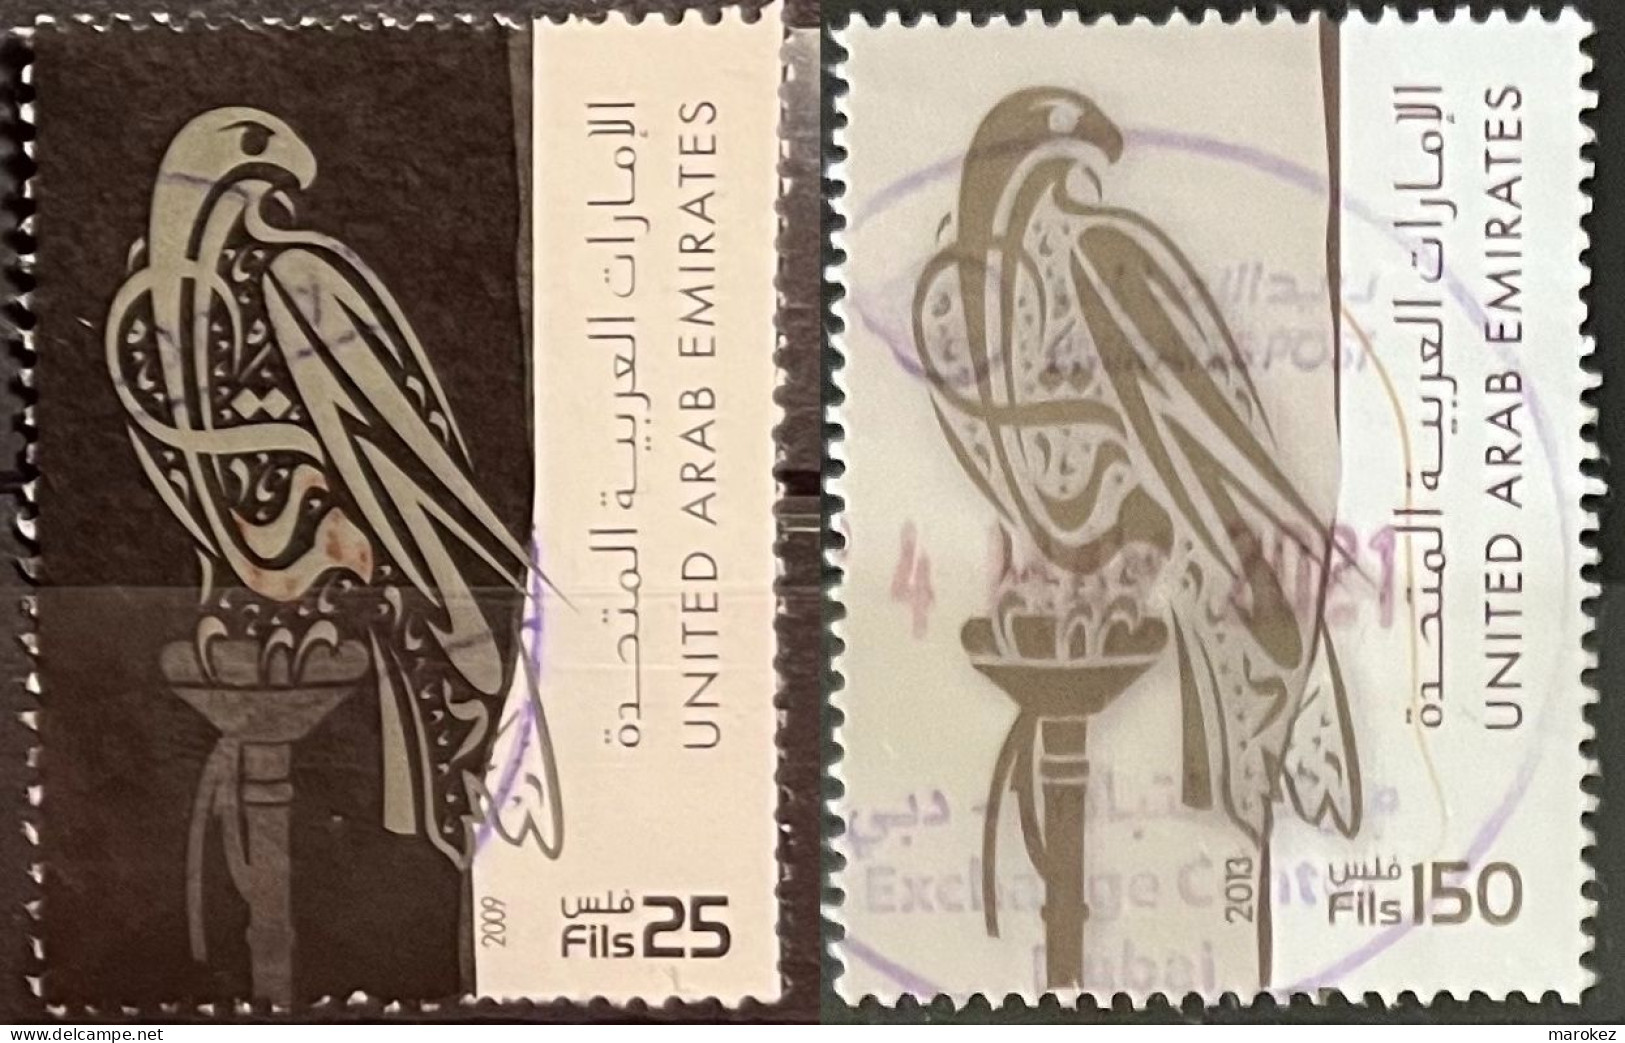 UAE 2009-2013 Definitives - Falcon 2 Postally Used Stamps MICHEL # 969A,1107 - Ver. Arab. Emirate